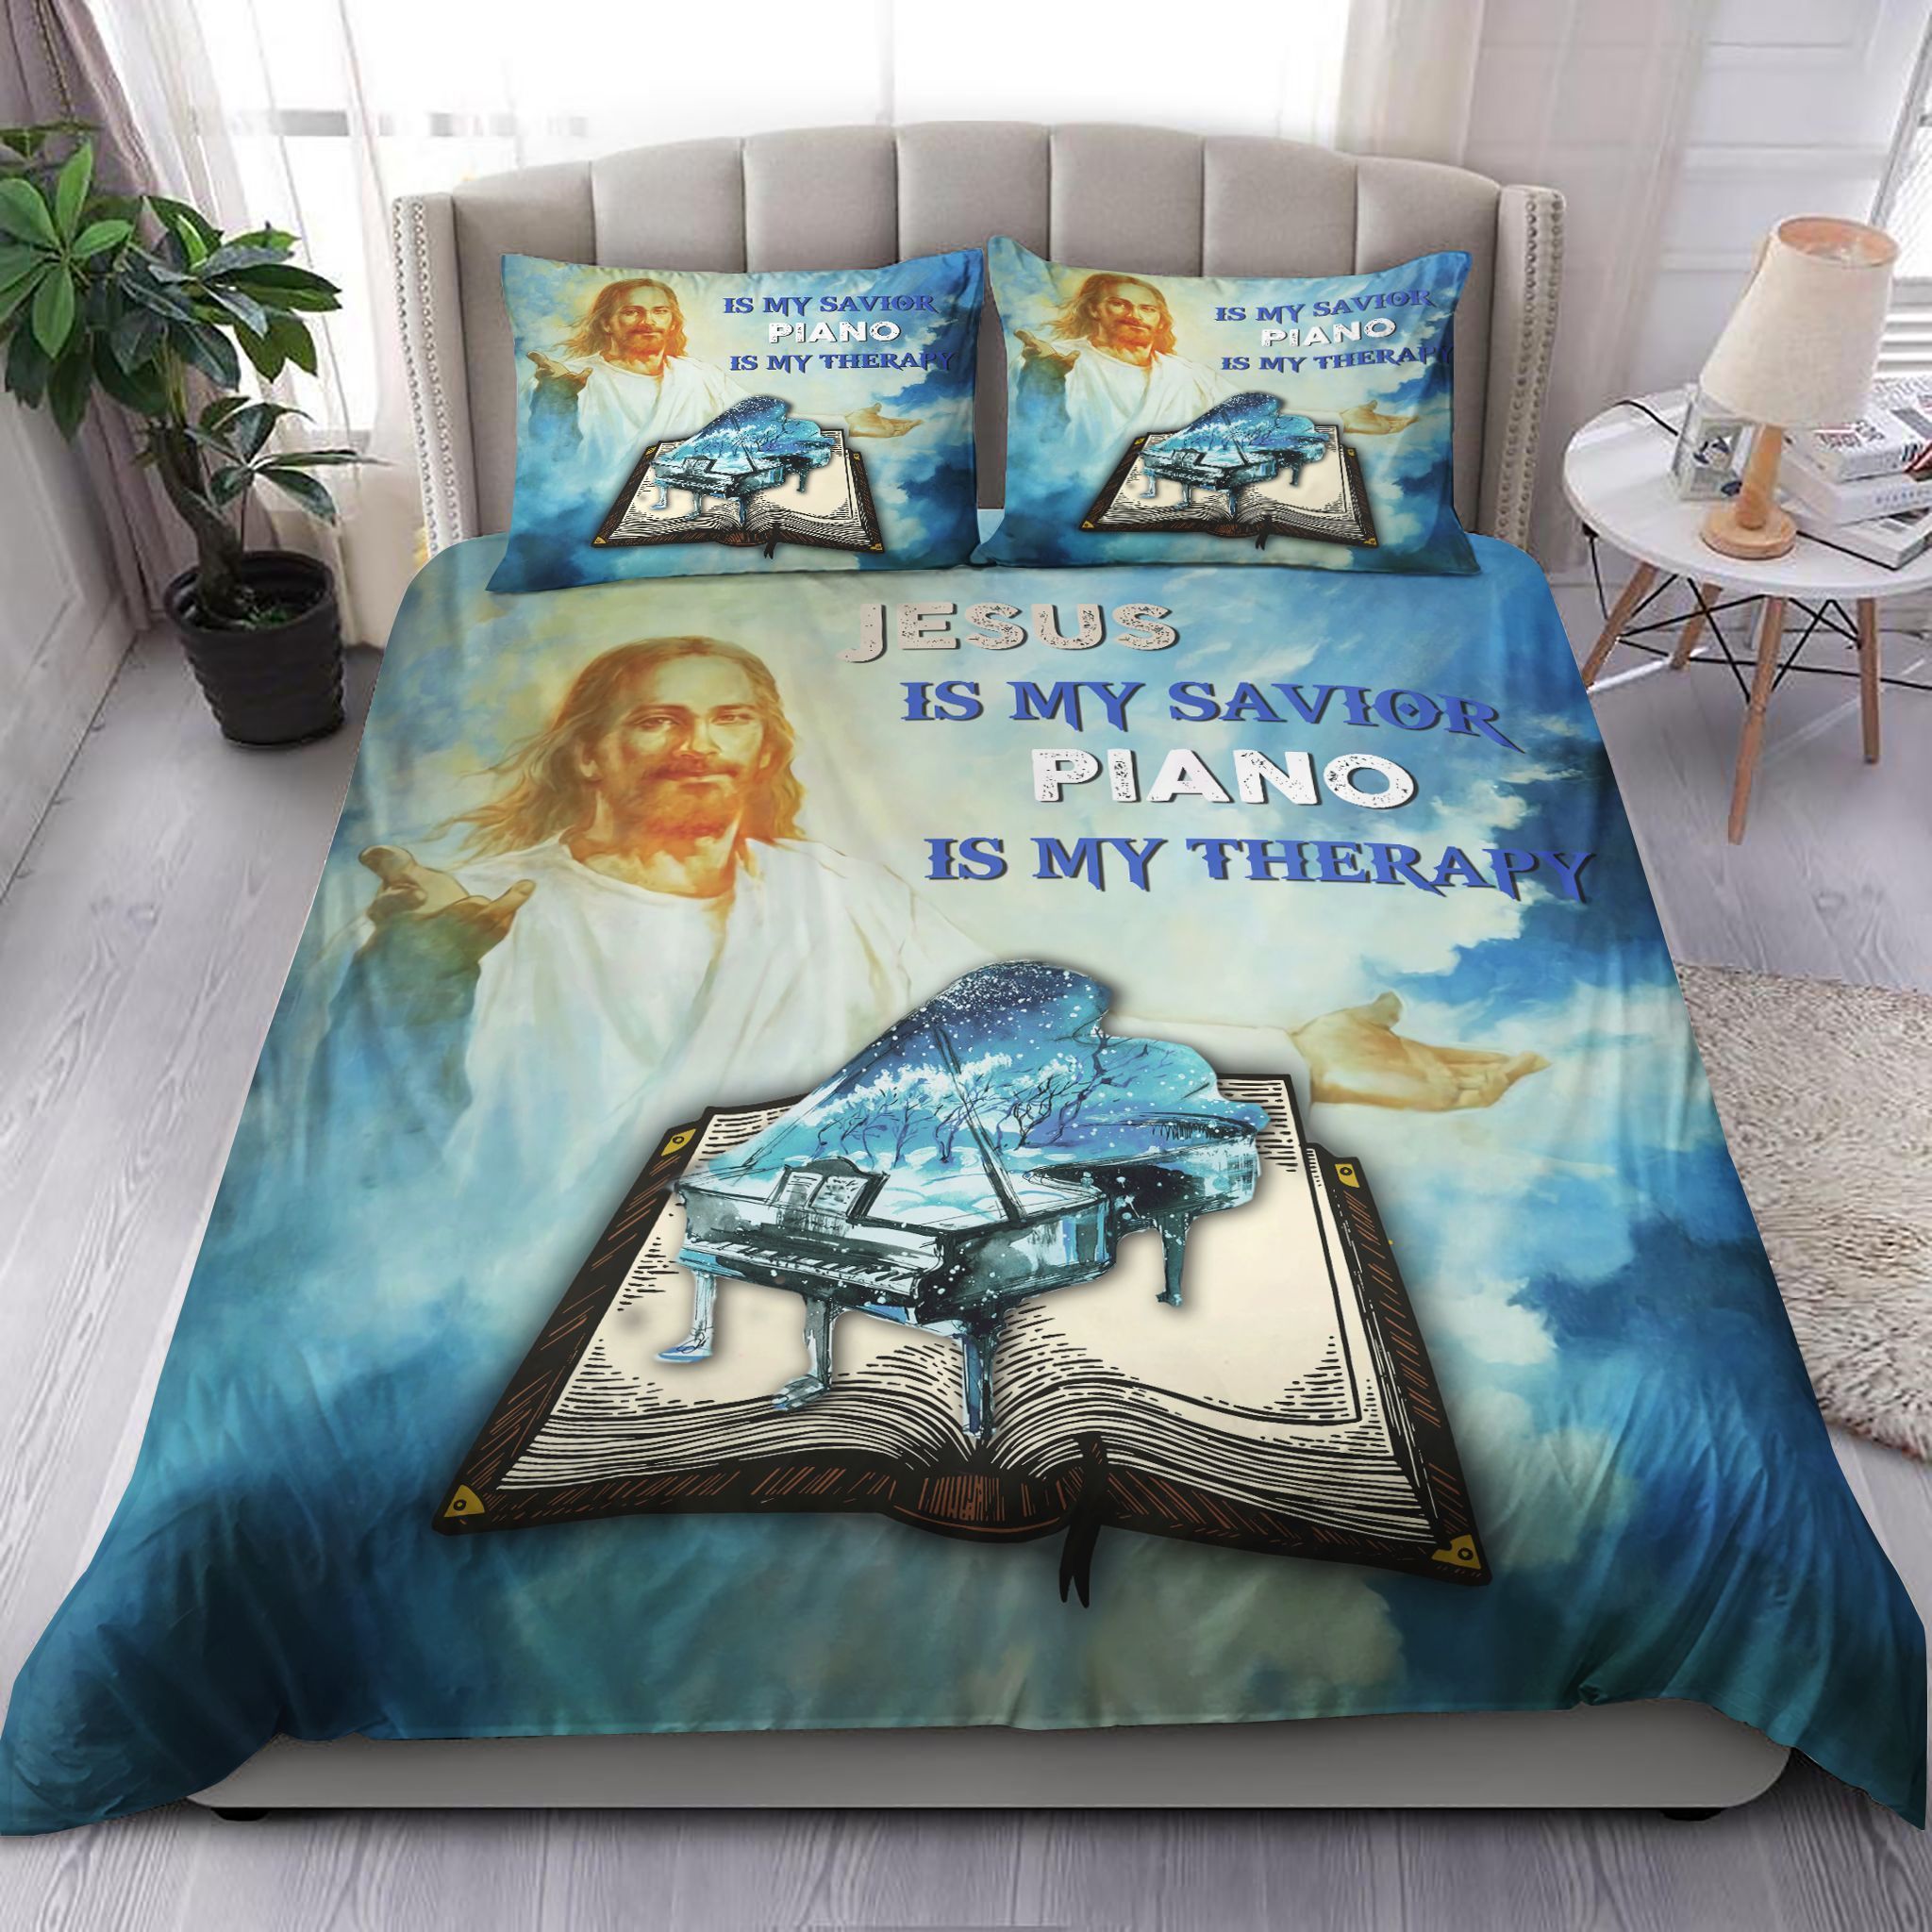 Jesus Is My Savior Piano Is My Therapy Bedding Set Bed Sheets Spread Comforter Duvet Cover Bedding Sets